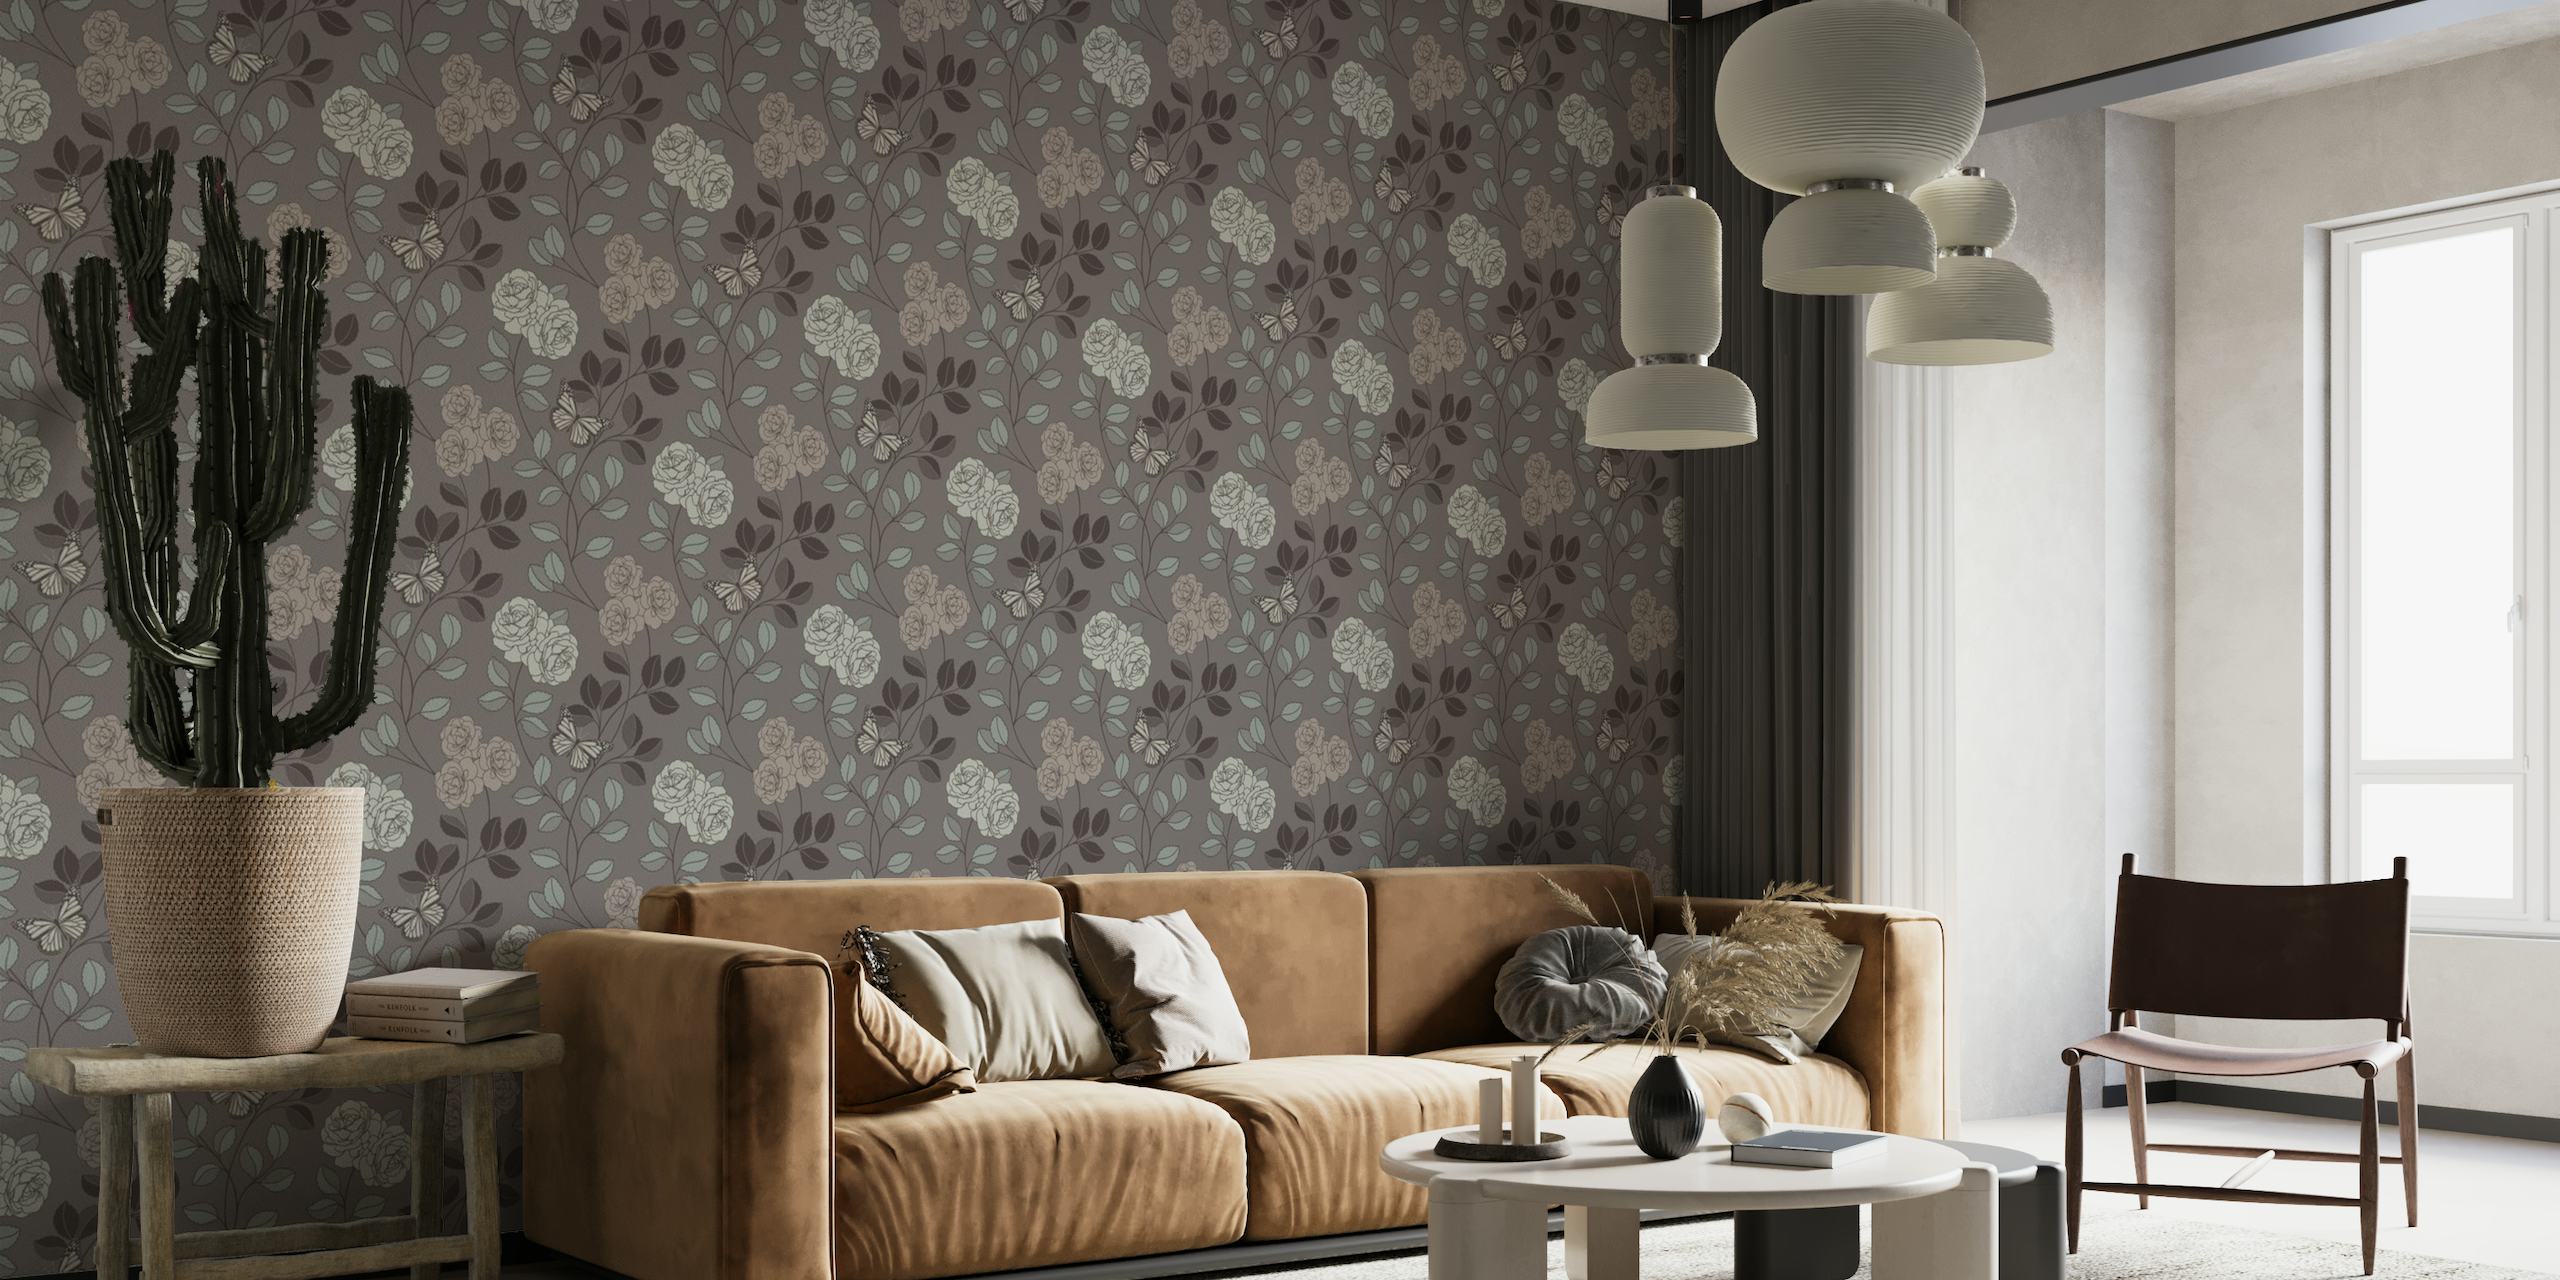 Elegant gray wall mural with sketched flowers and butterflies for a tranquil home ambiance.